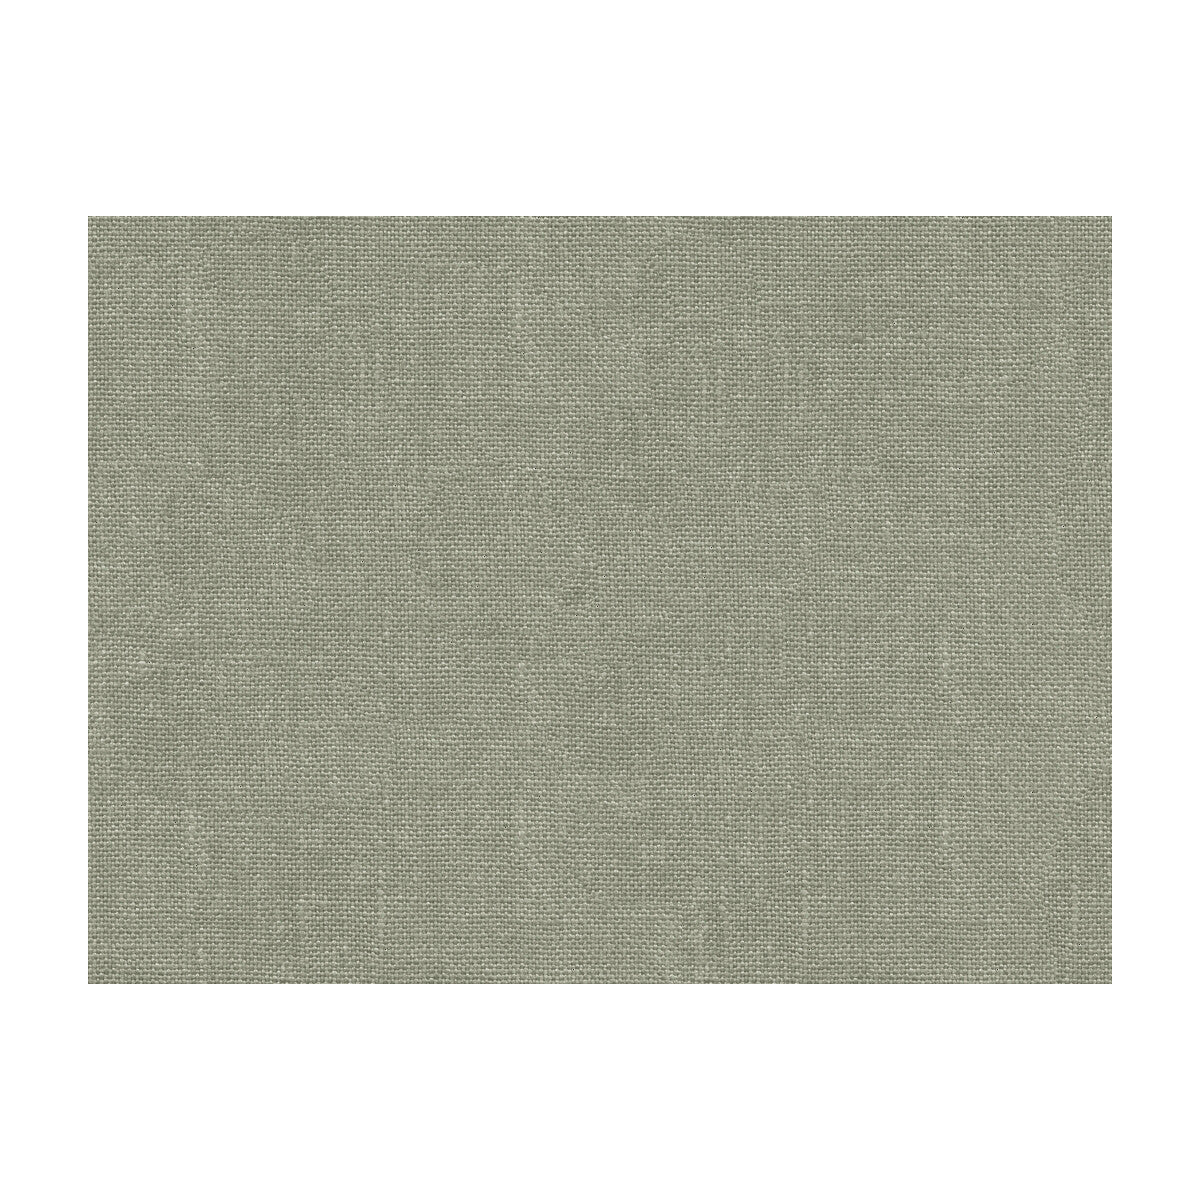 Moderation fabric in grey color - pattern 34640.11.0 - by Kravet Design in the Perfect Plains collection